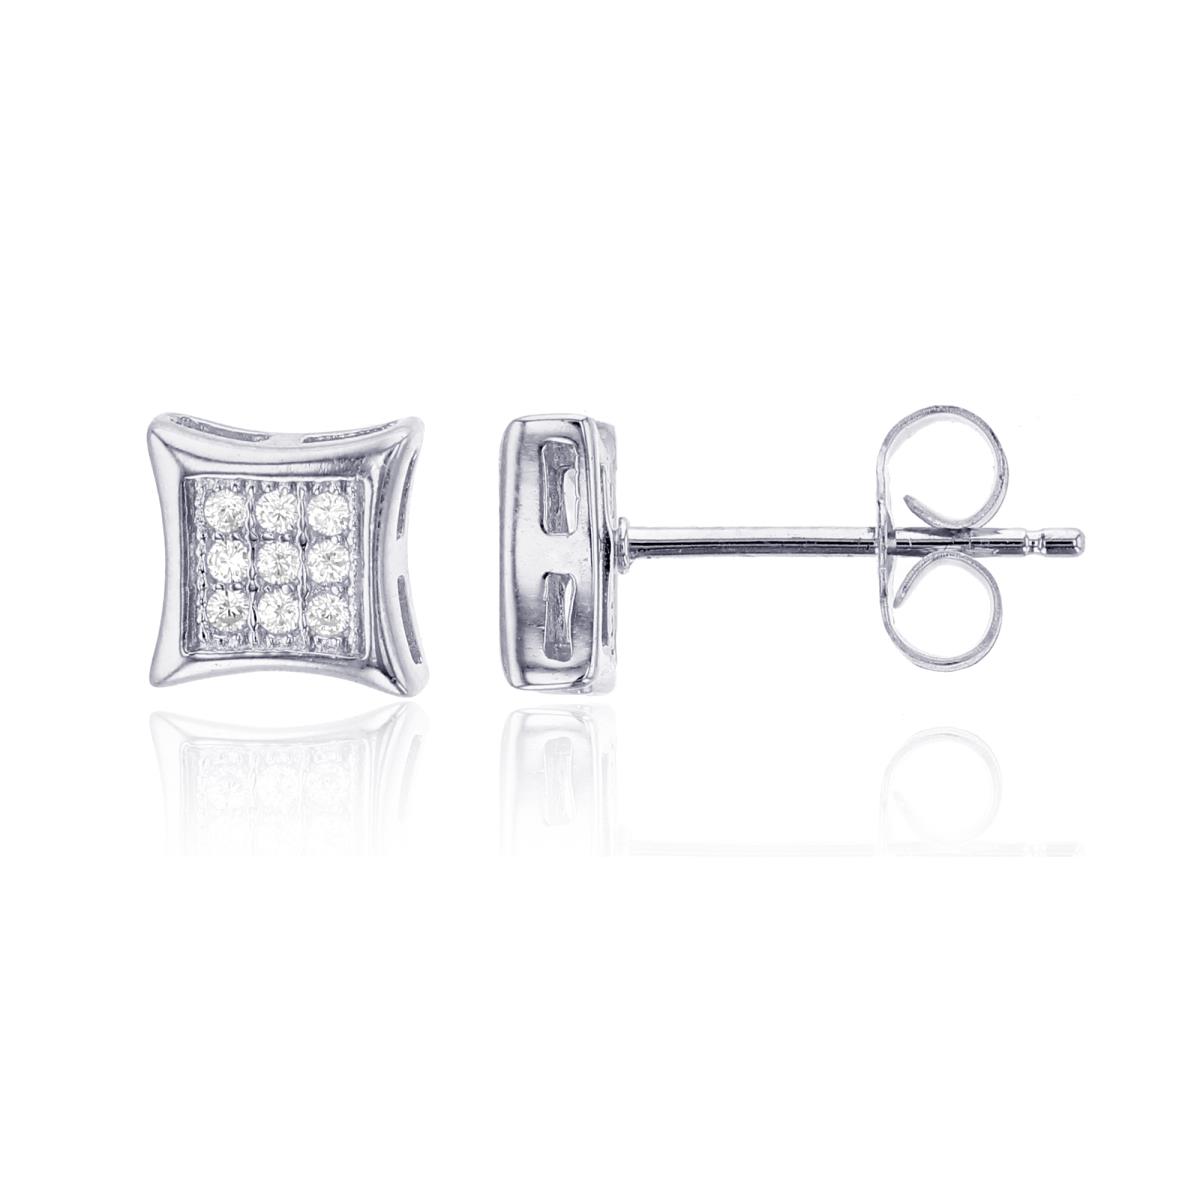 Sterling Silver 3x3 Curved Square Stud